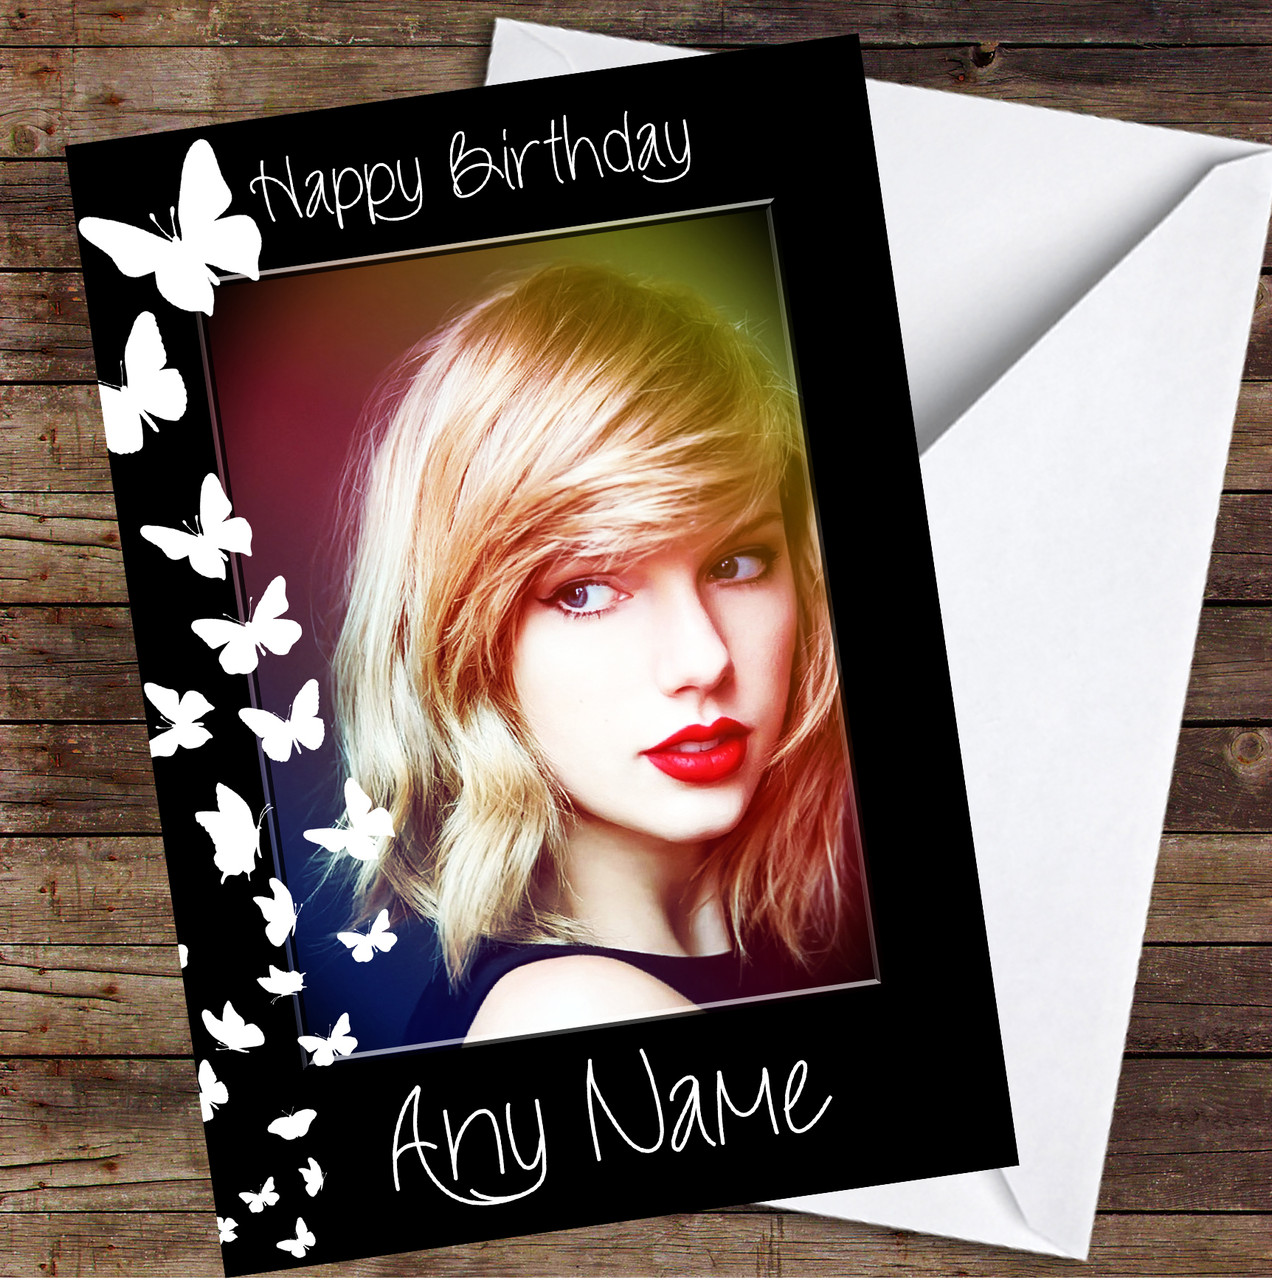 Taylor Swift Butterfly Effect Personalized Birthday Card - Red Heart Print